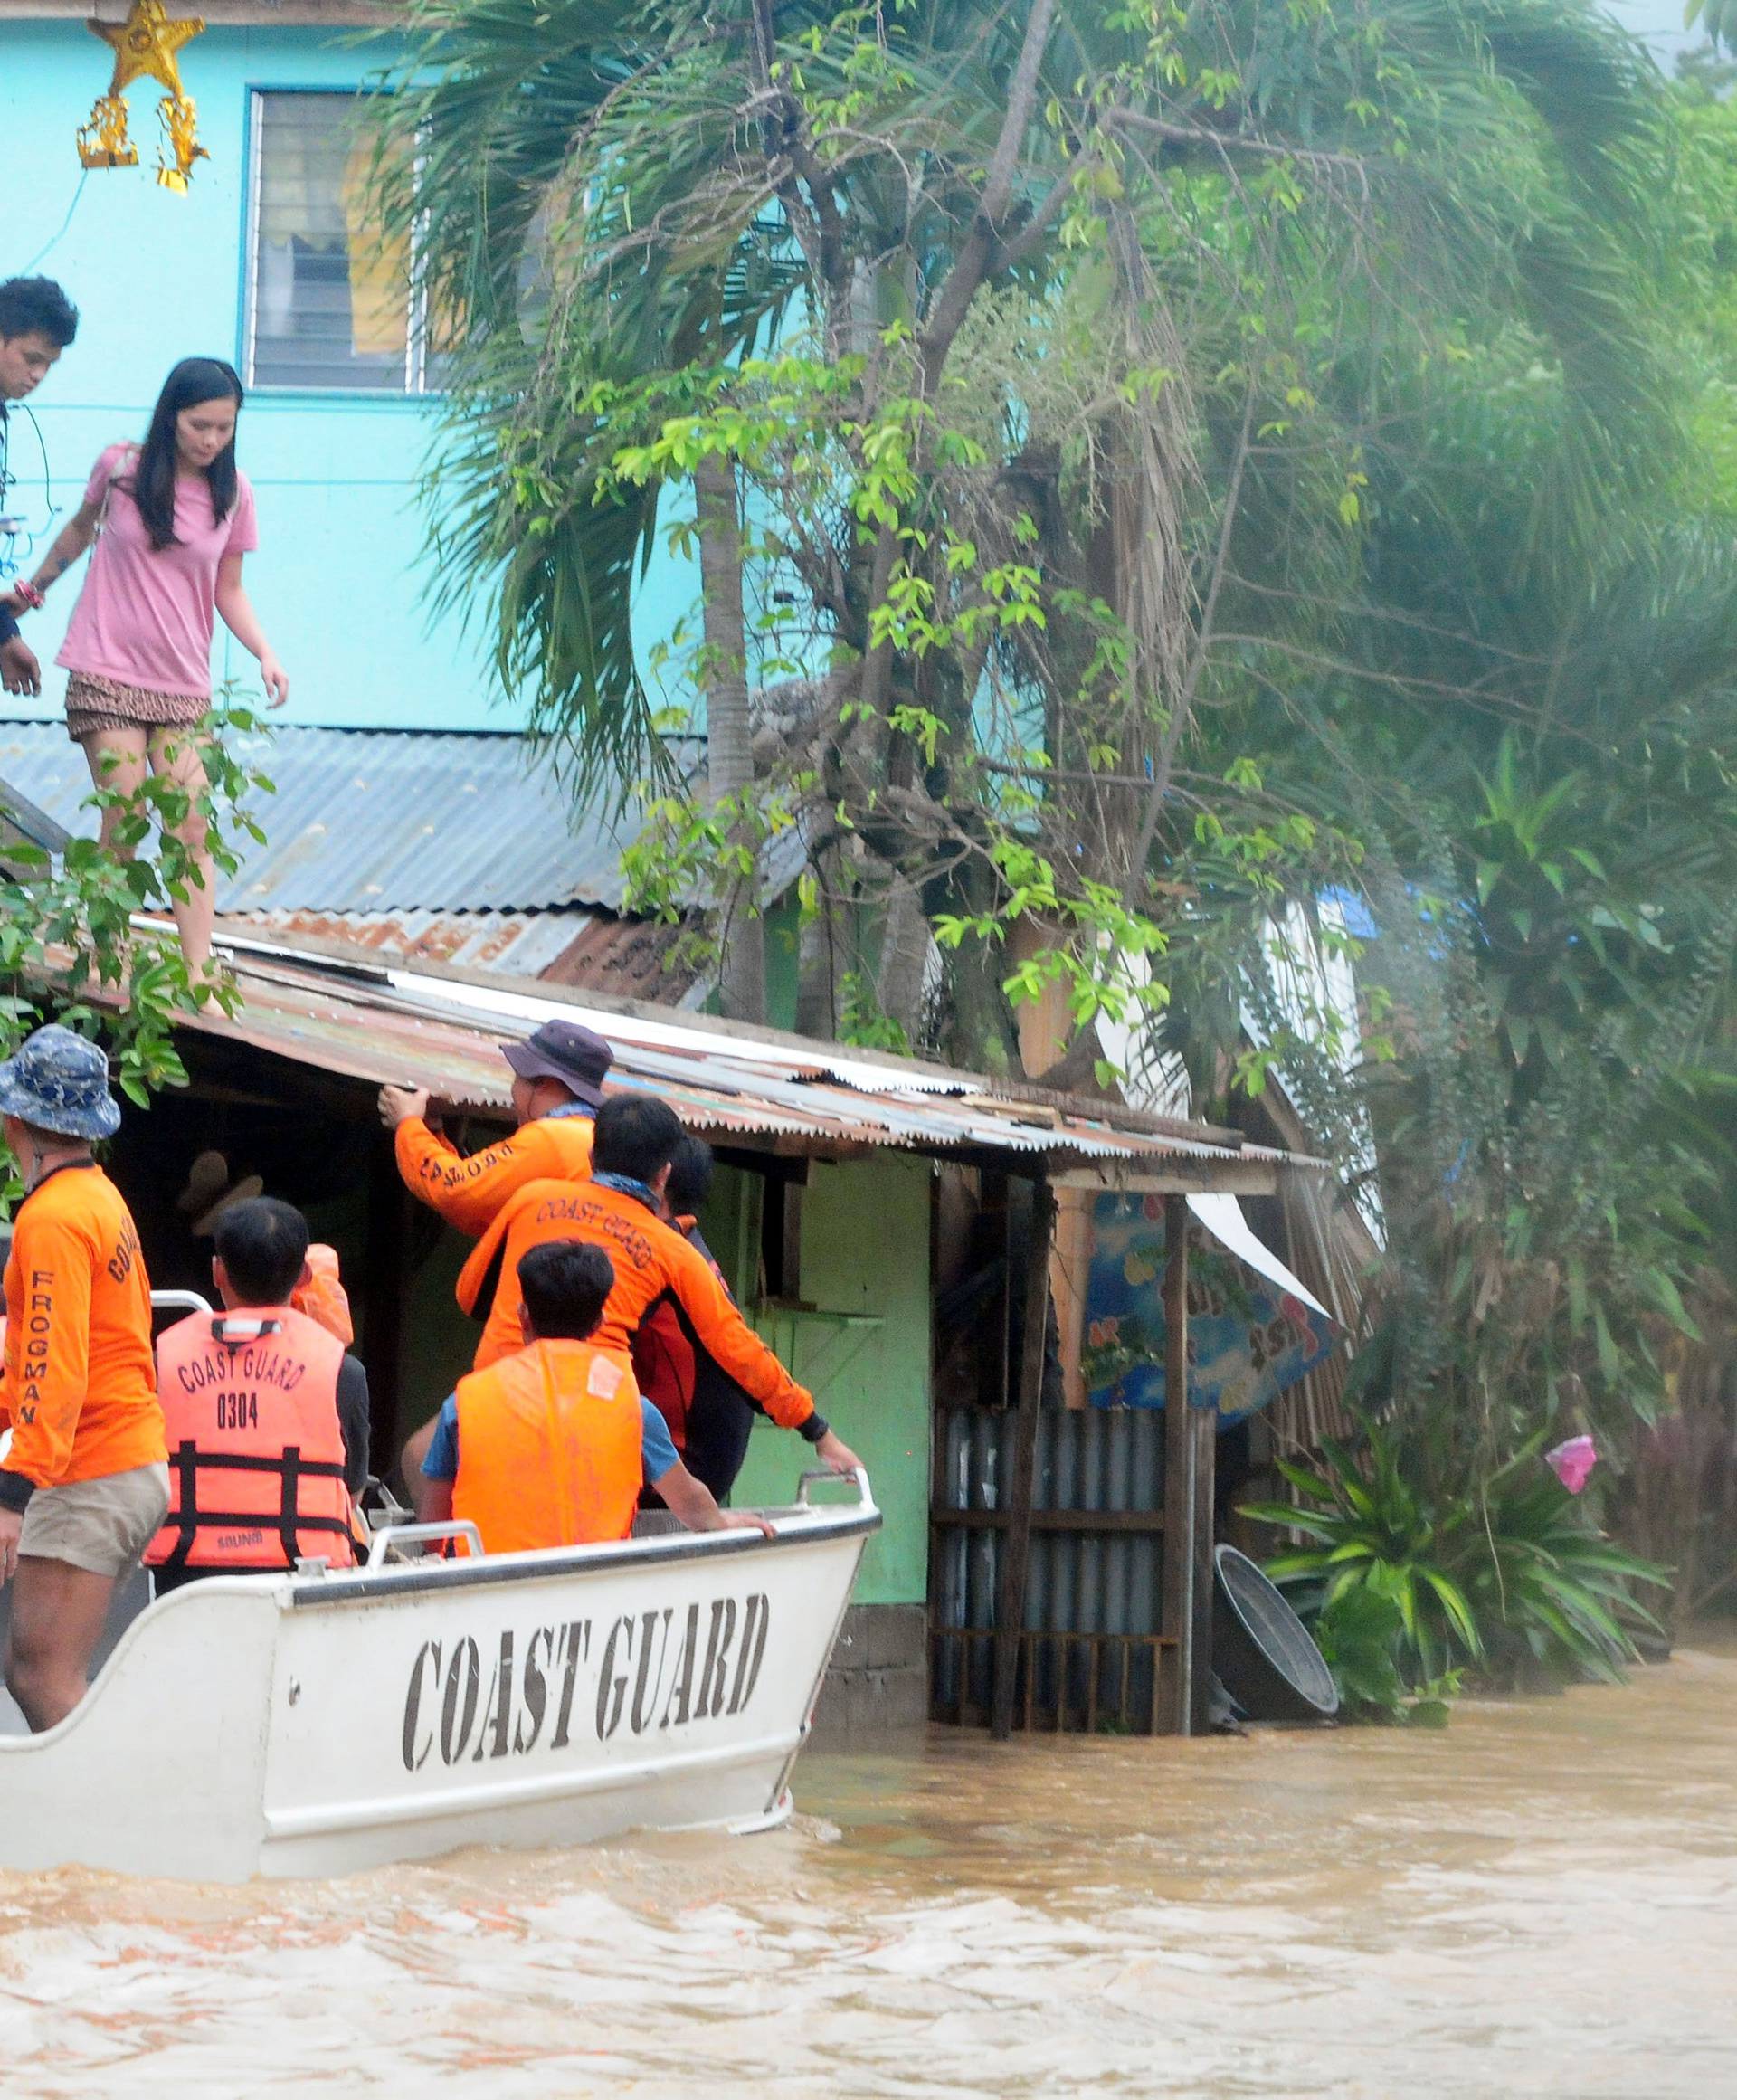 Rescuers evacute residents during heavy flooding in Cagayan de Oro city in the Philippines